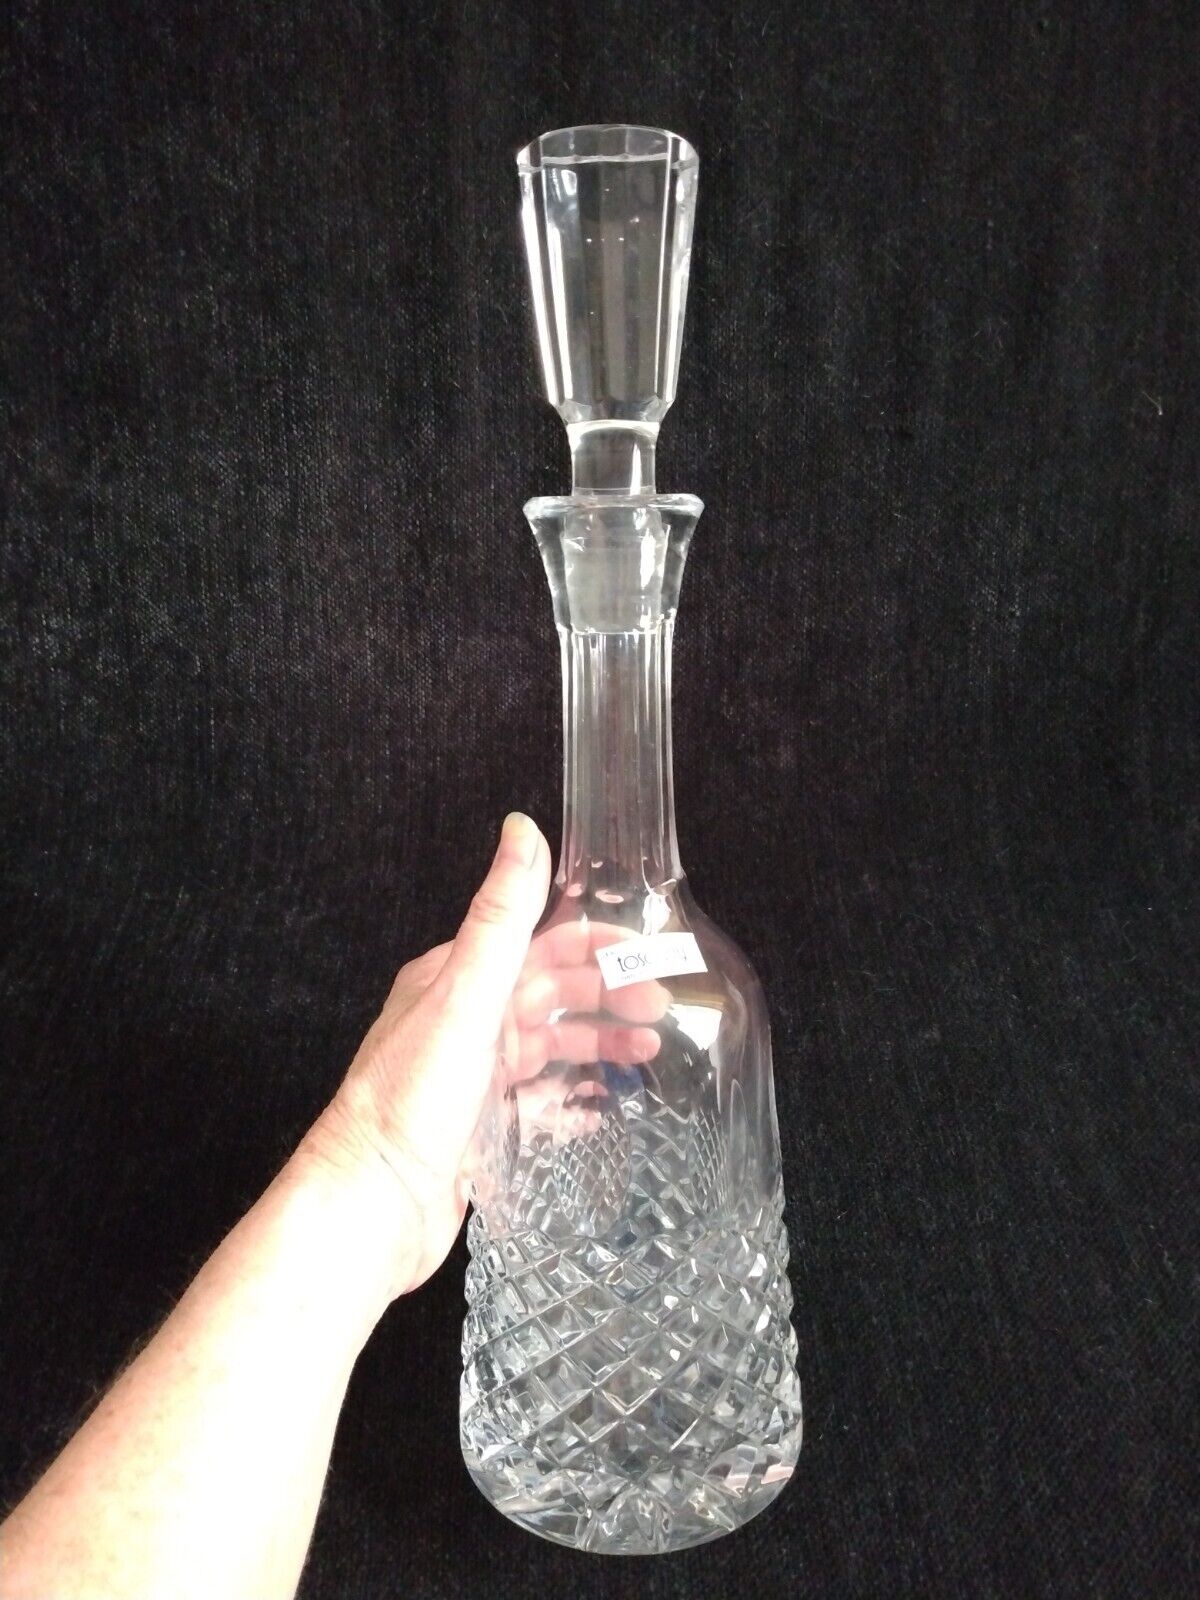 Vintage Toscany Hand Cut Lead Crystal Decanter With Stopper Handmade In Romania